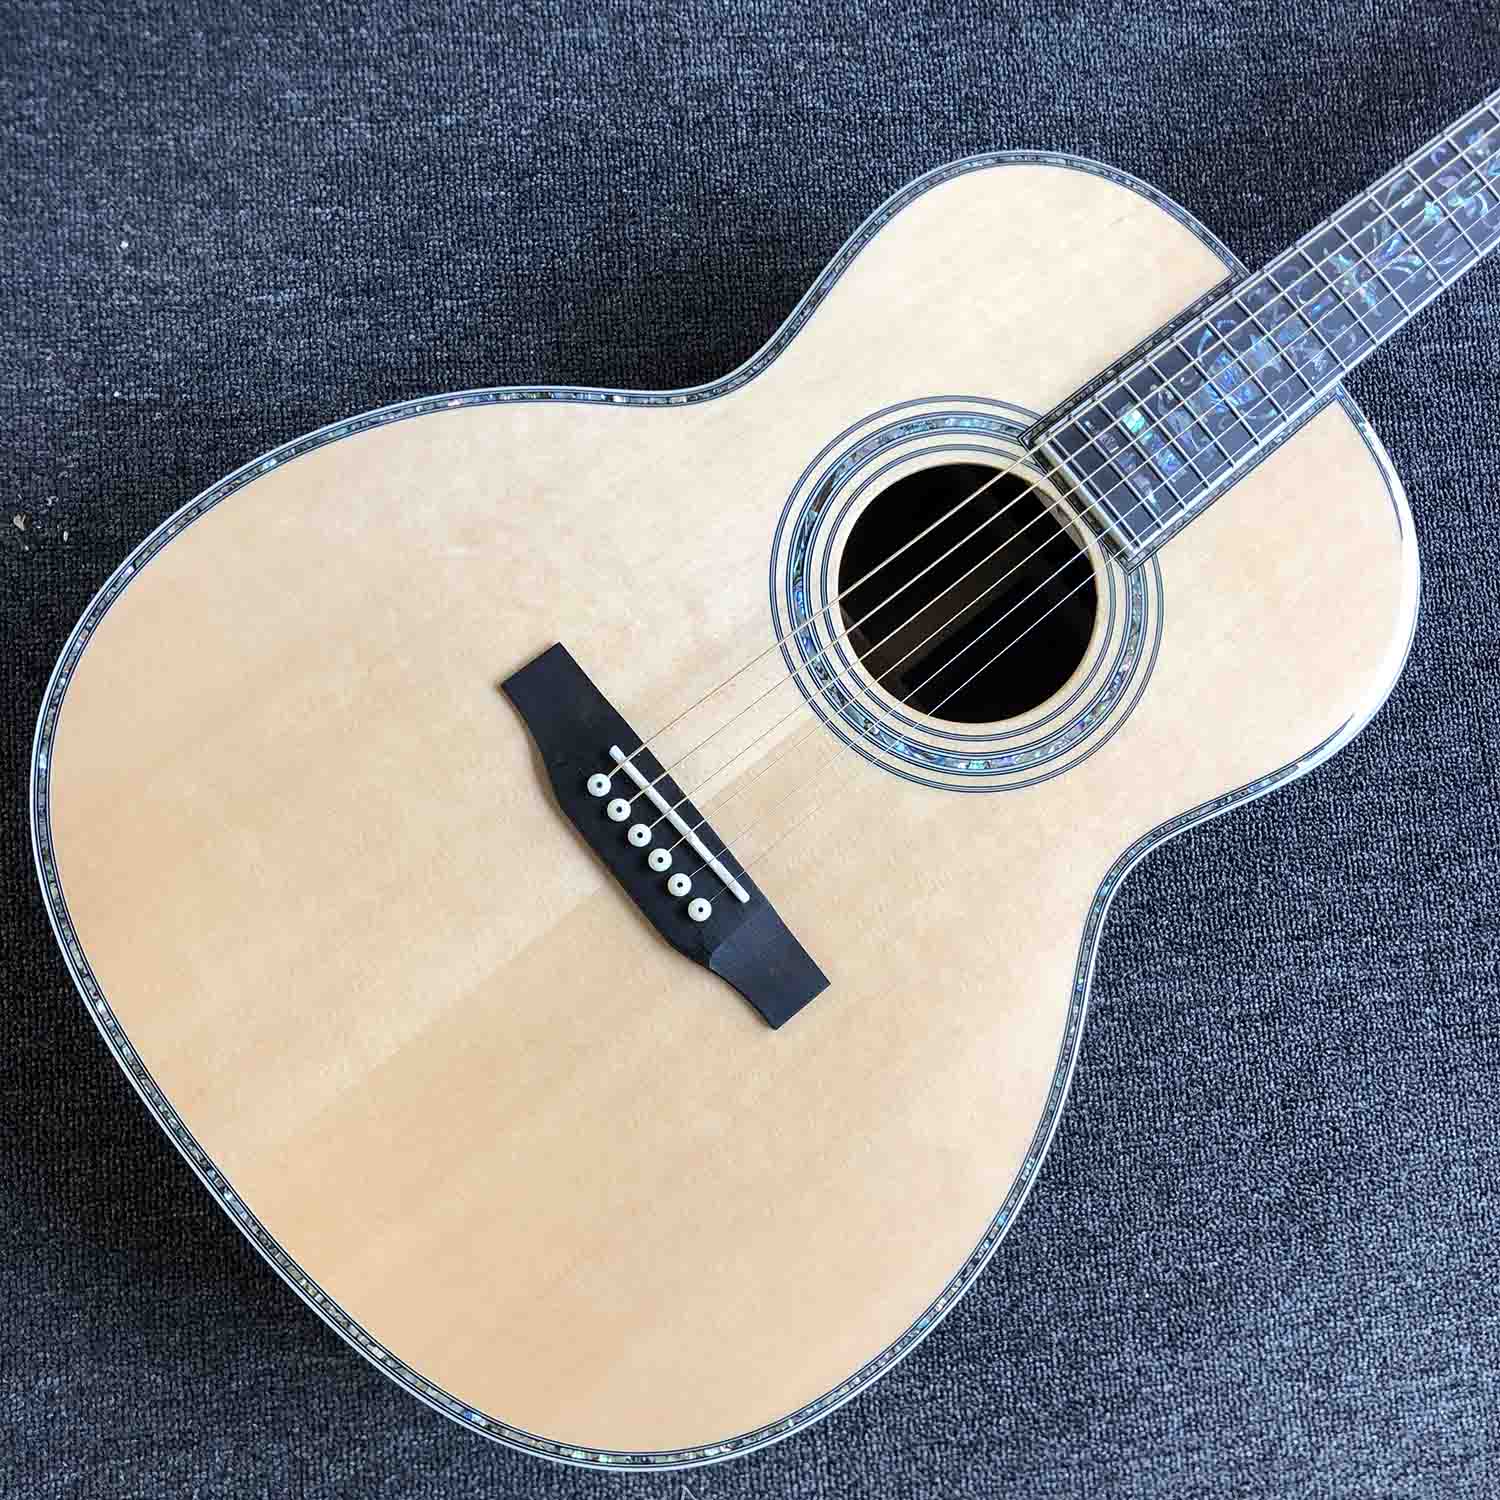 Custom OOO Style 39 Inch 44mm Nut Wide Solid Wood Acoustic Electric Guitar with Electronic EQ